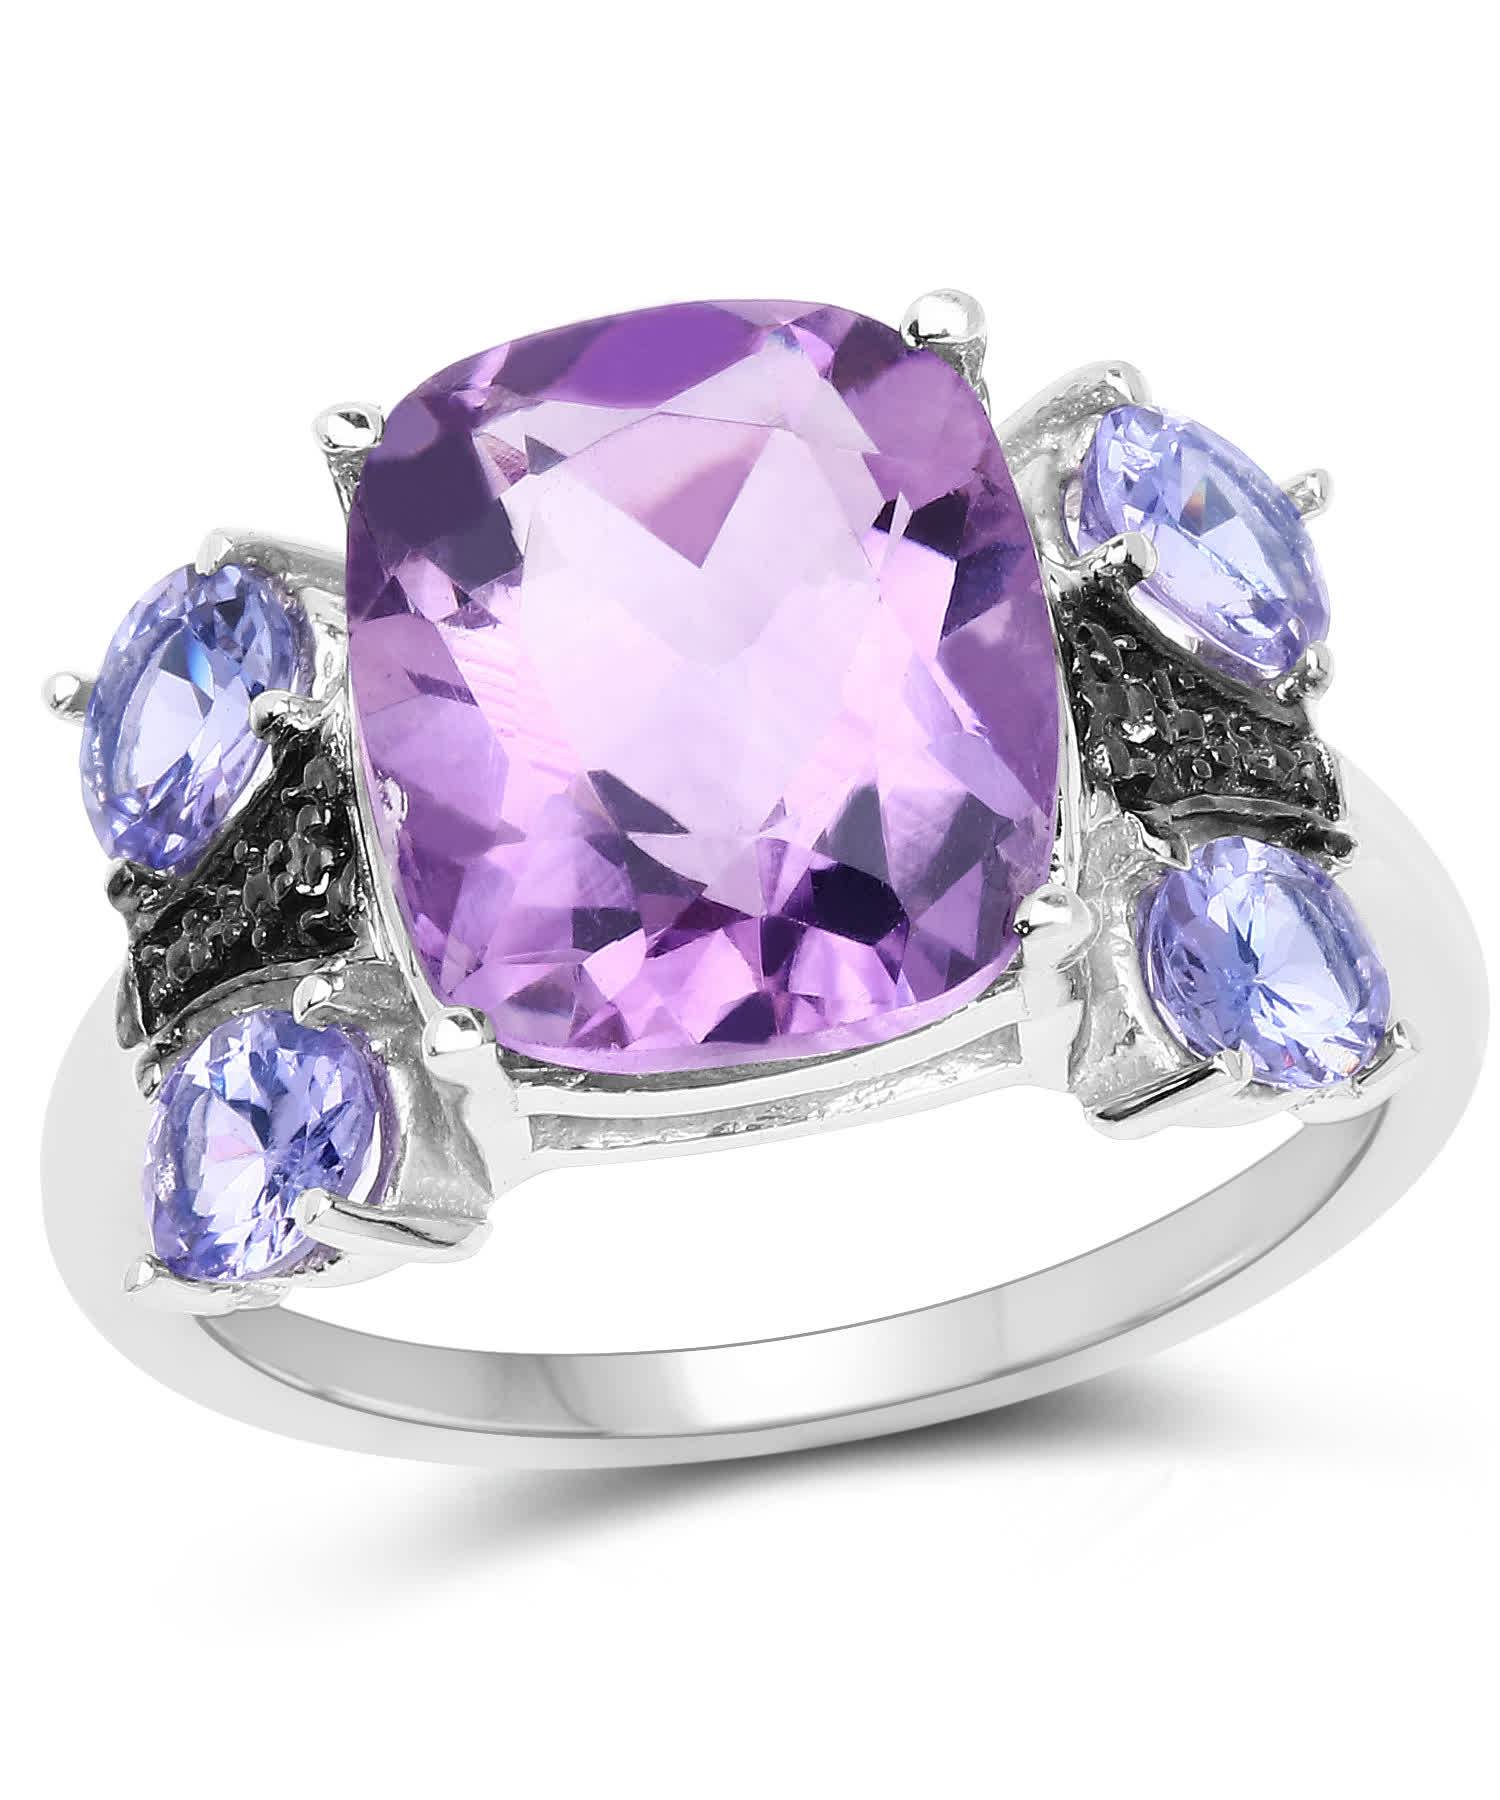 5.53ctw Natural Amethyst, Tanzanite and Topaz Rhodium Plated Silver Cocktail Ring View 1